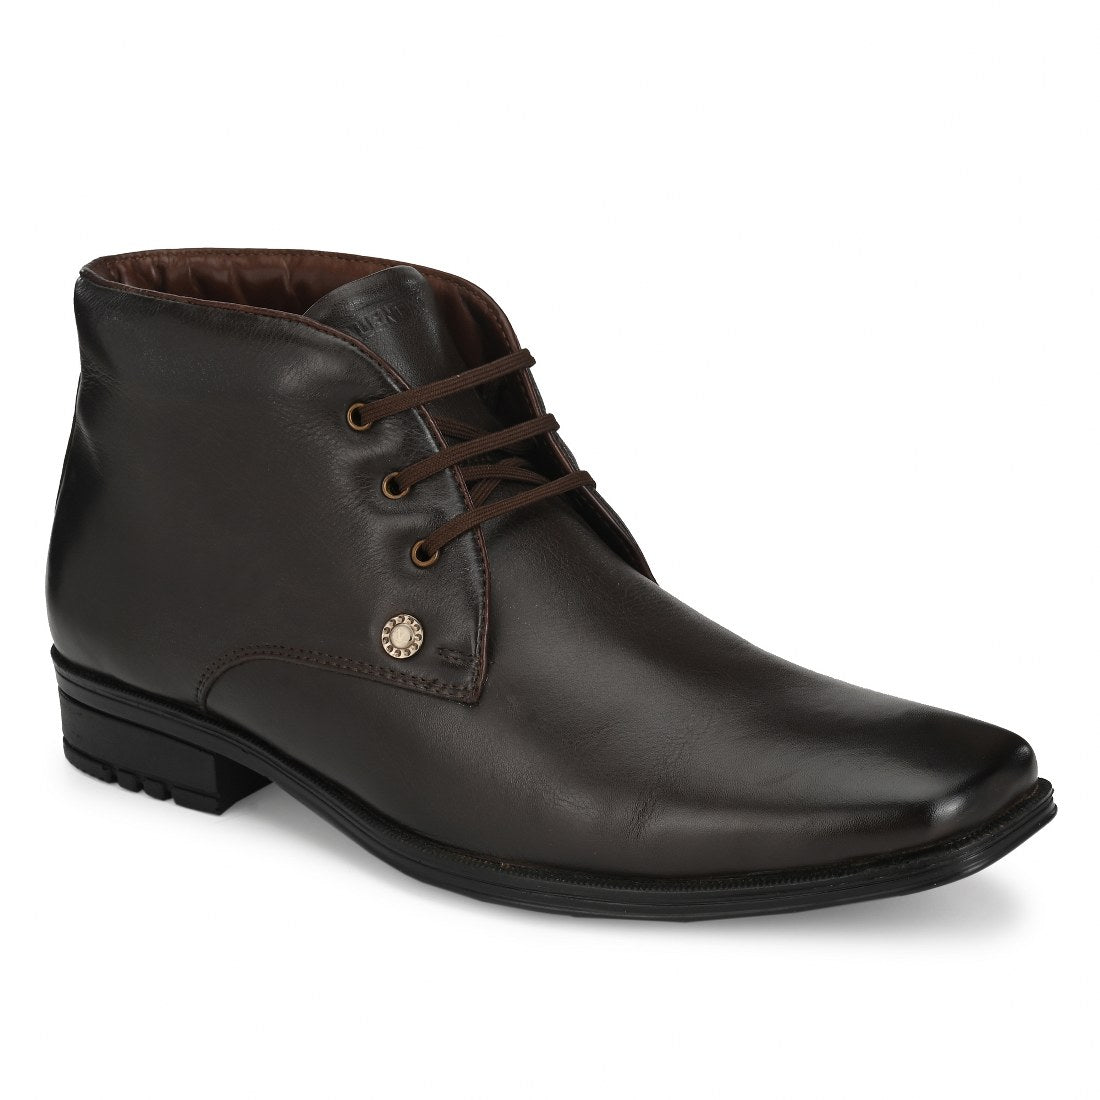 NEWTOP-94B MEN LEATHER BROWN FORMAL BOOT ANKLE DERBY